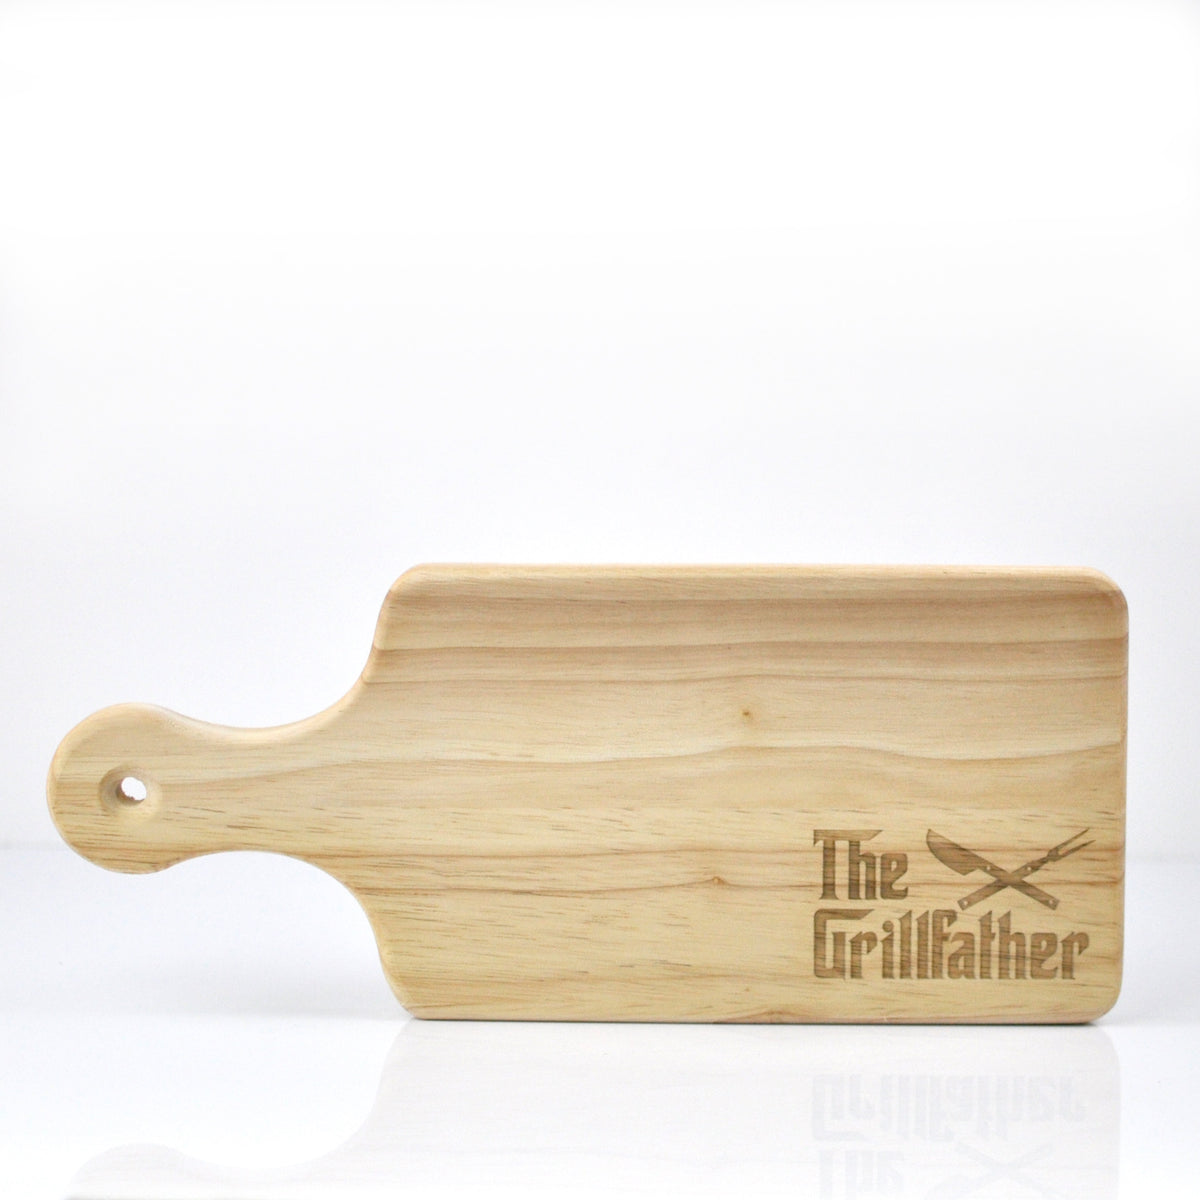 Grillfather Serving Board